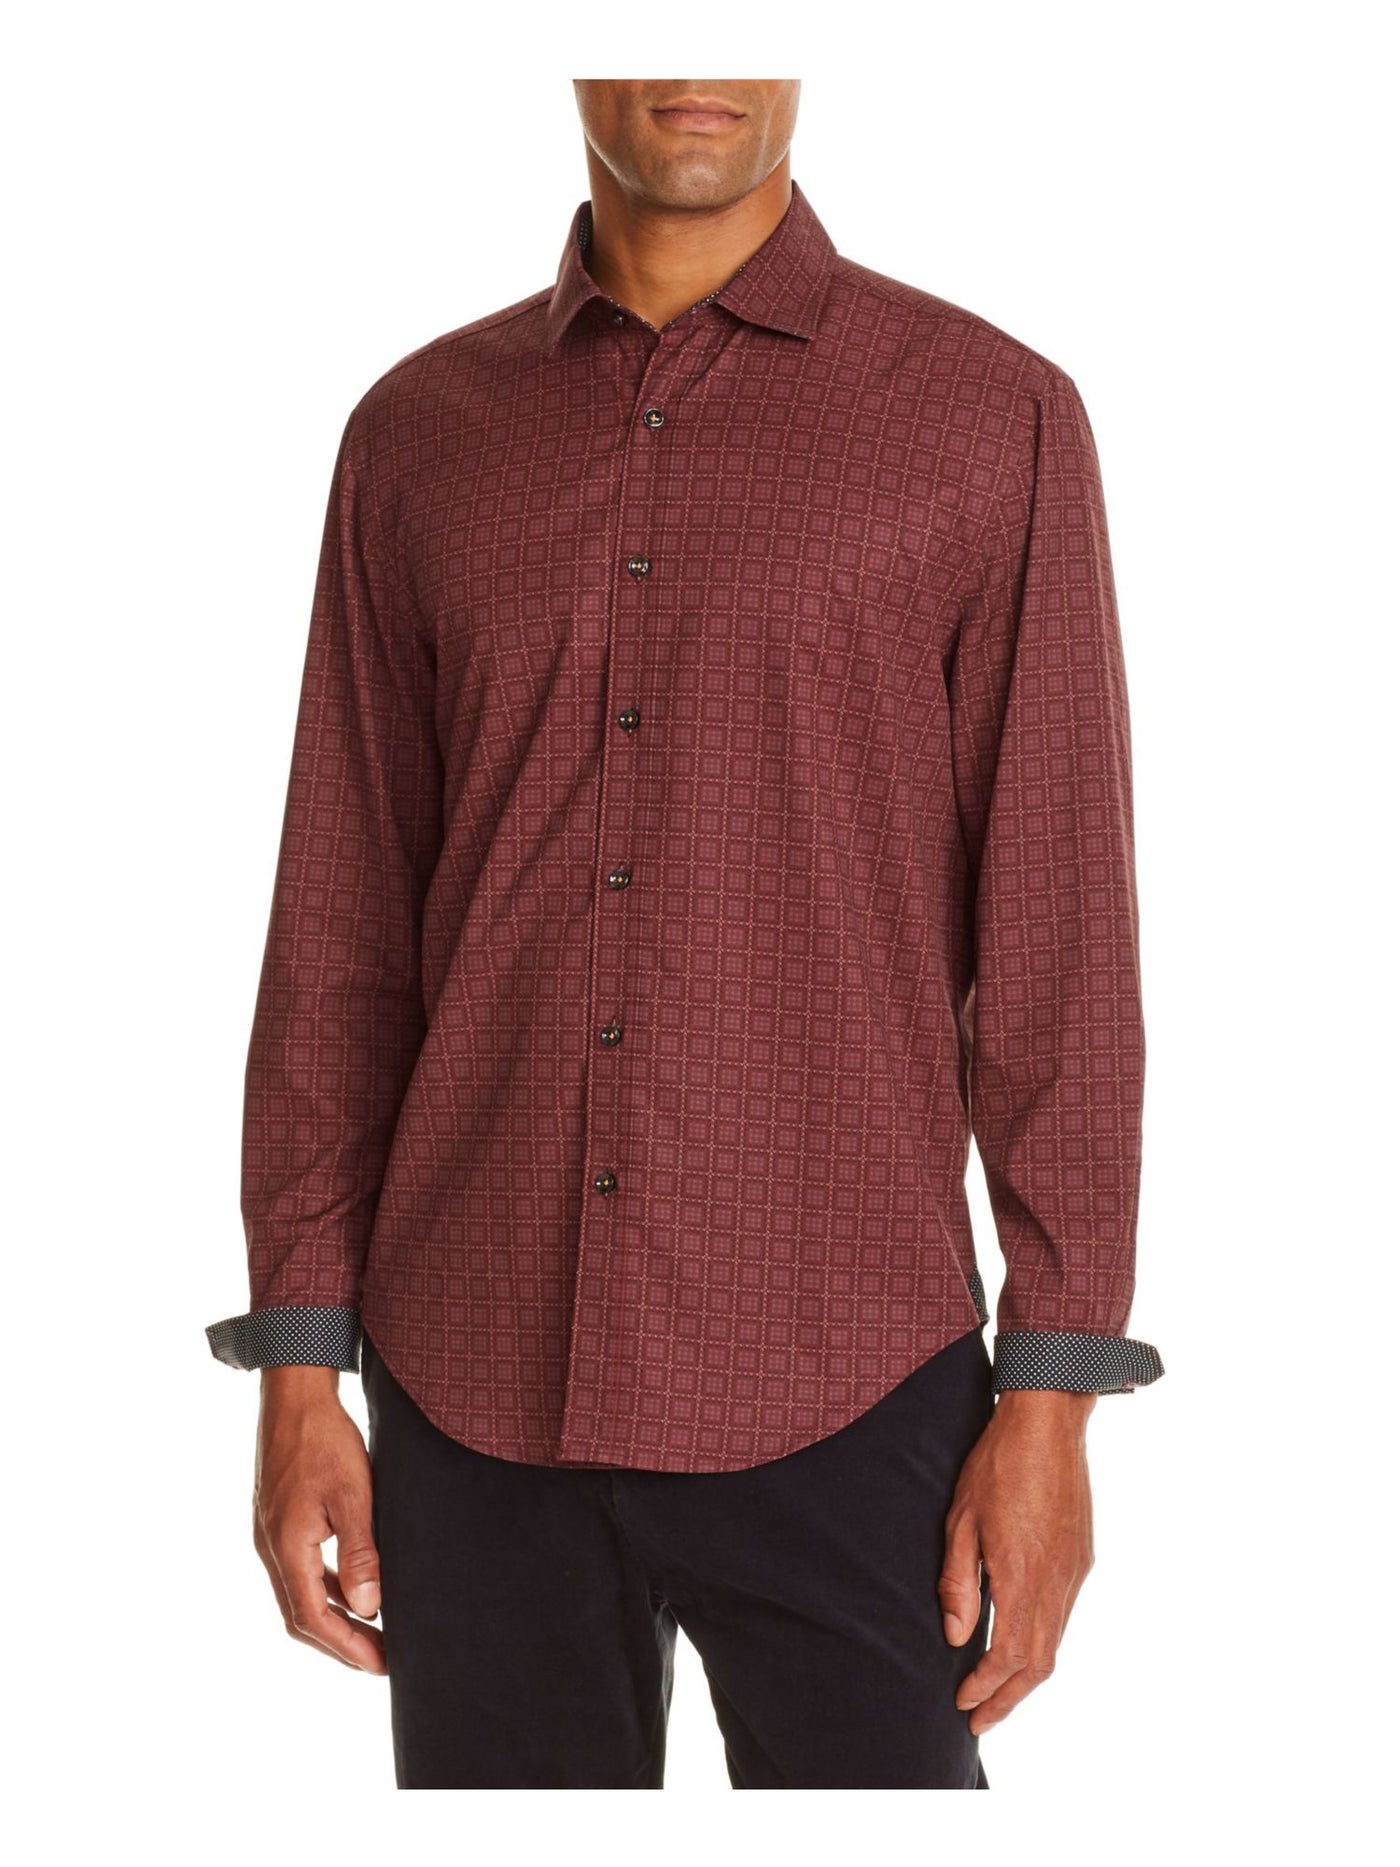 TALLIA SPORT Mens Red Patterned Button Down Stretch Casual Shirt L